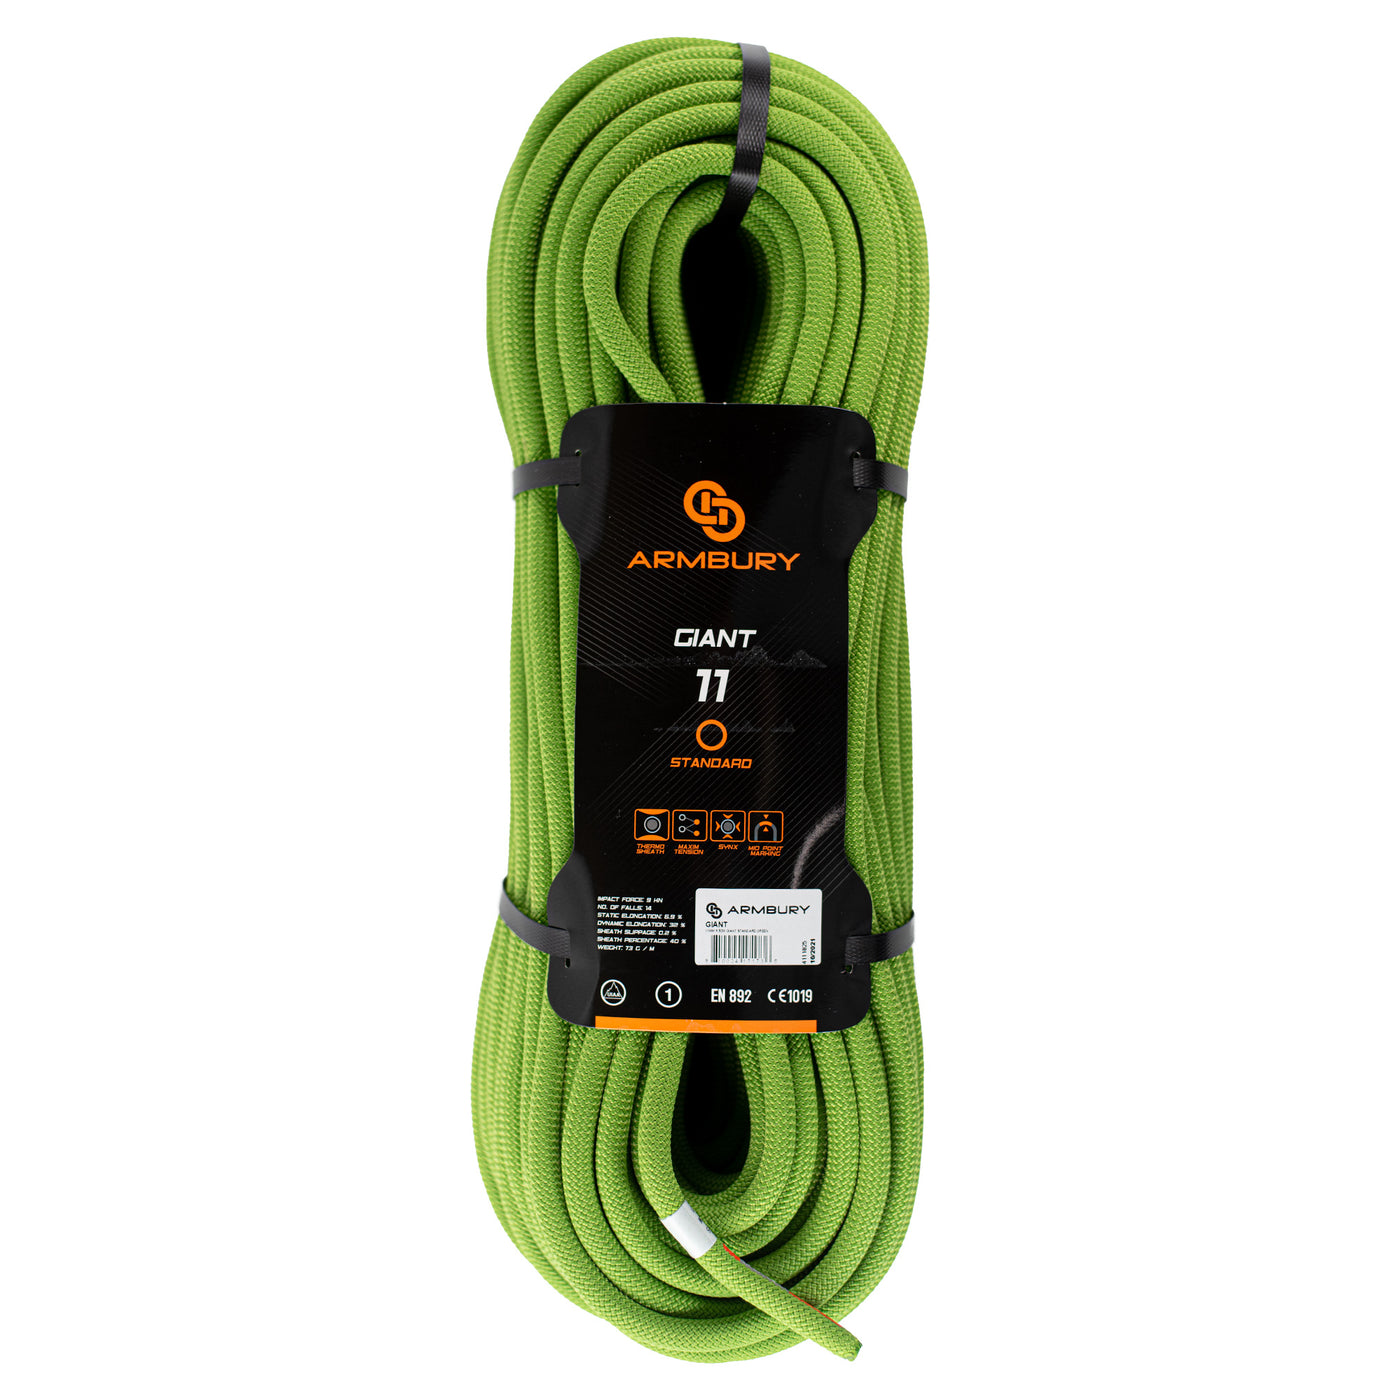 GIANT 11 DYNAMIC ROPE